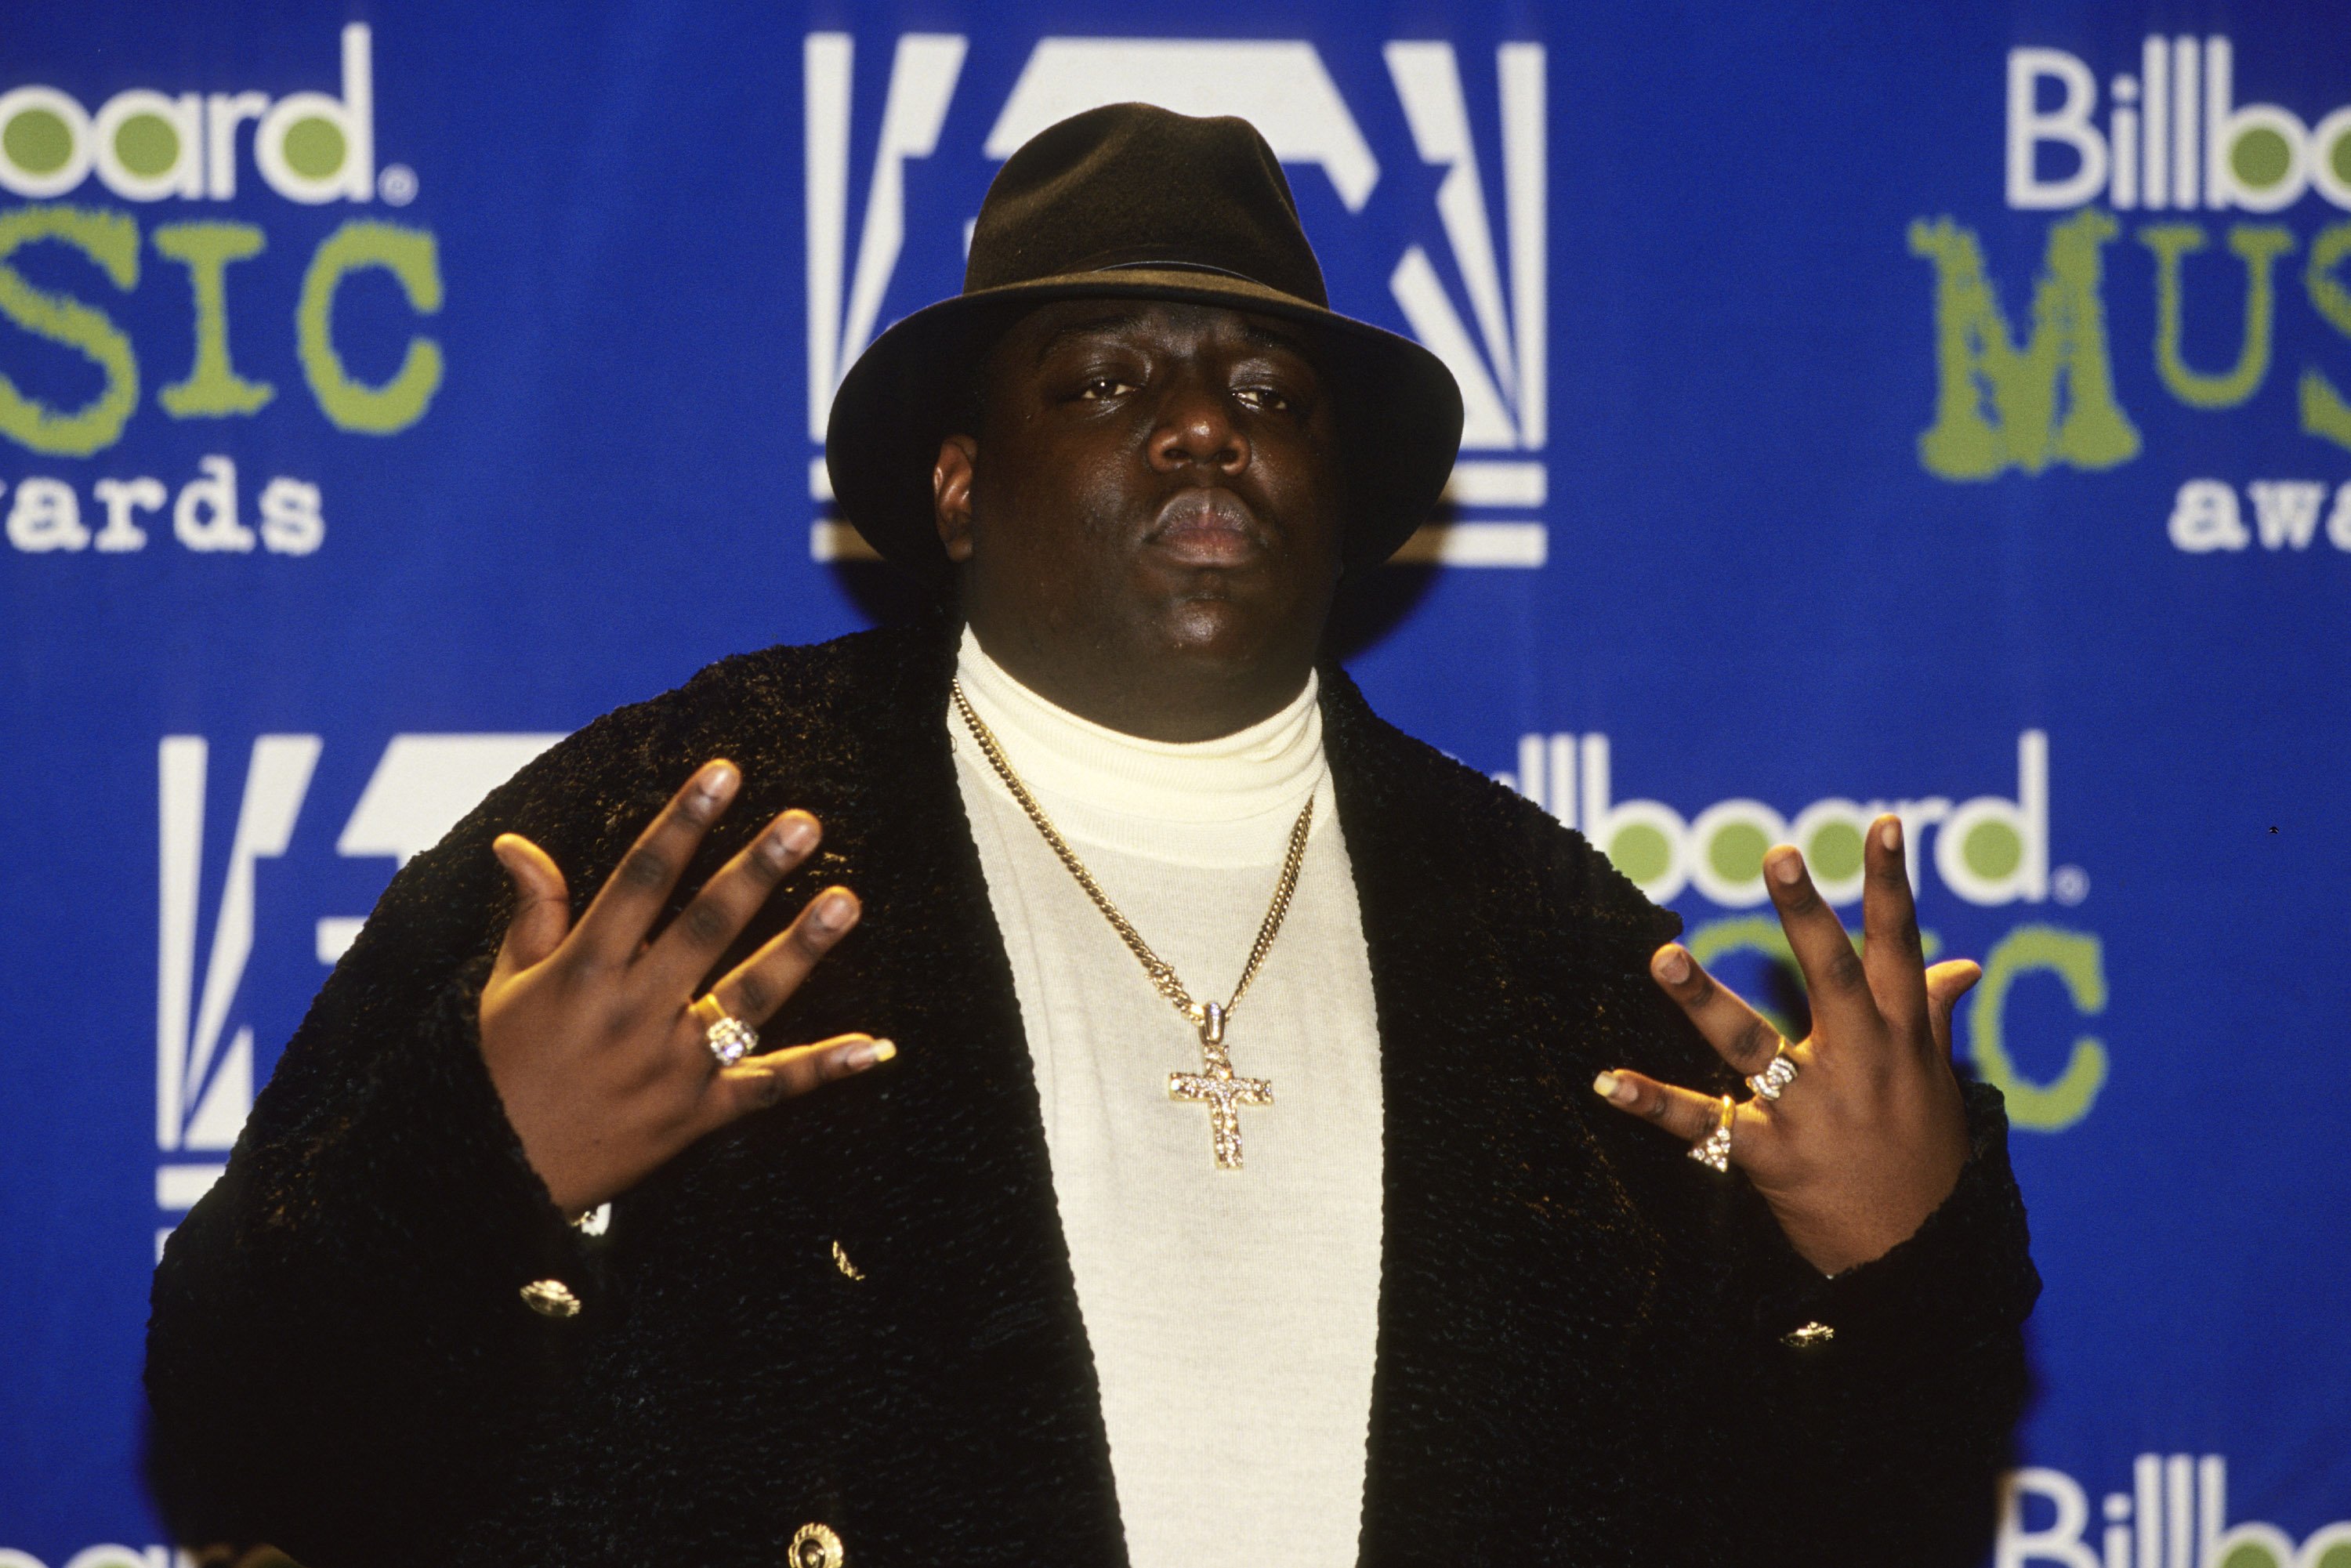 Notorious B.I.G. at the 1995 Billboard Music Awards in New York on December 6, 1996. | Source: Getty Images